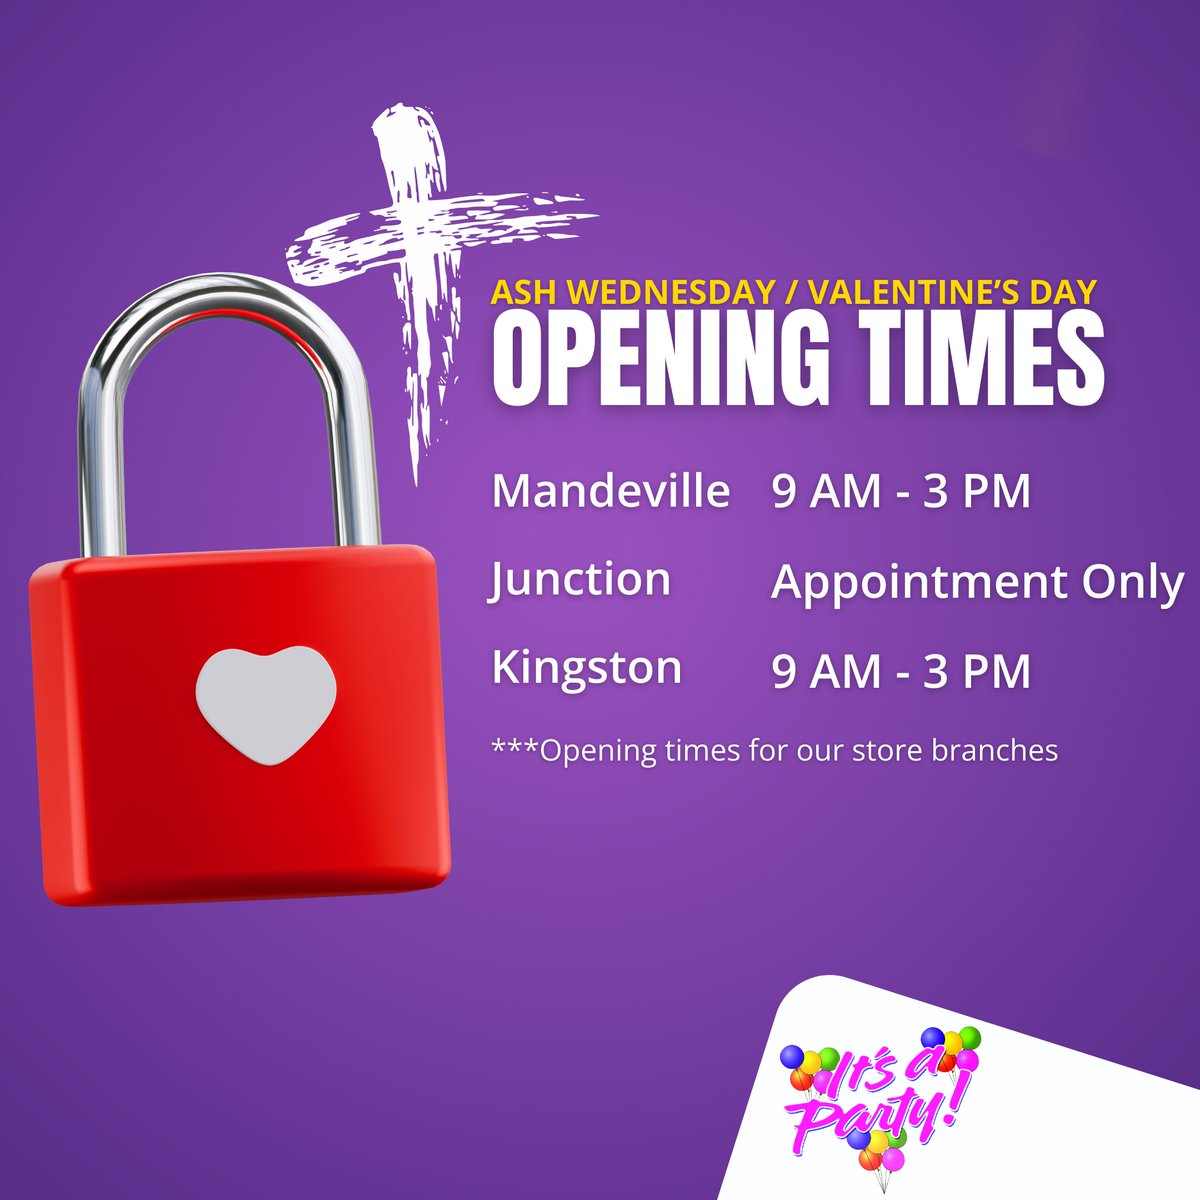 Opening times for our store branches this Ash and Valentine's Day. 

#partystorejamaica #AshWednesday #valentinesday #mandevillejamaica #kingstonjamaica #stelizabethjamaica